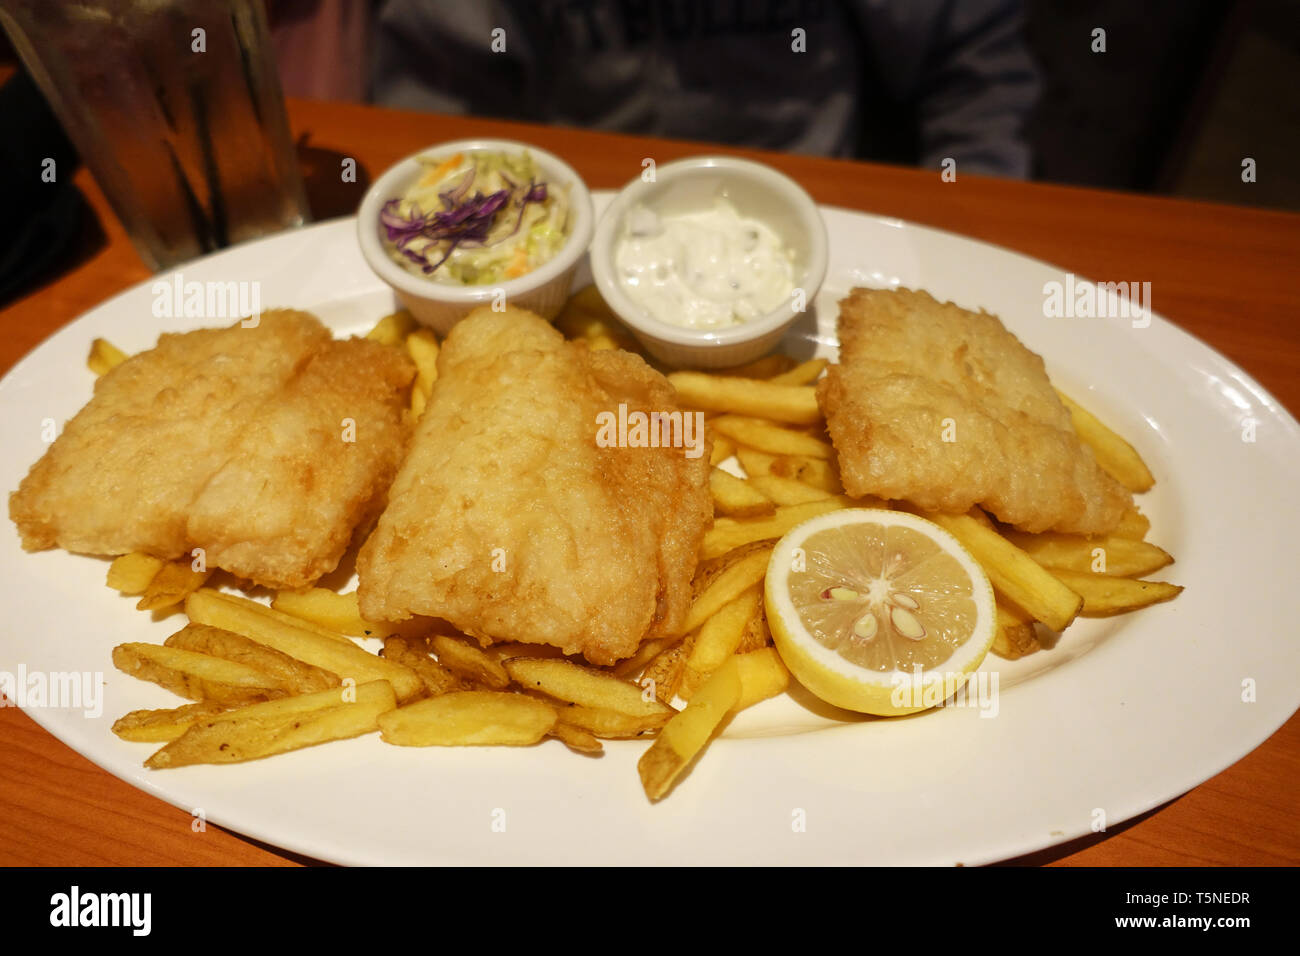 Fish and chips with tartare sauce, coleslaw and lemon on white plate Stock Photo